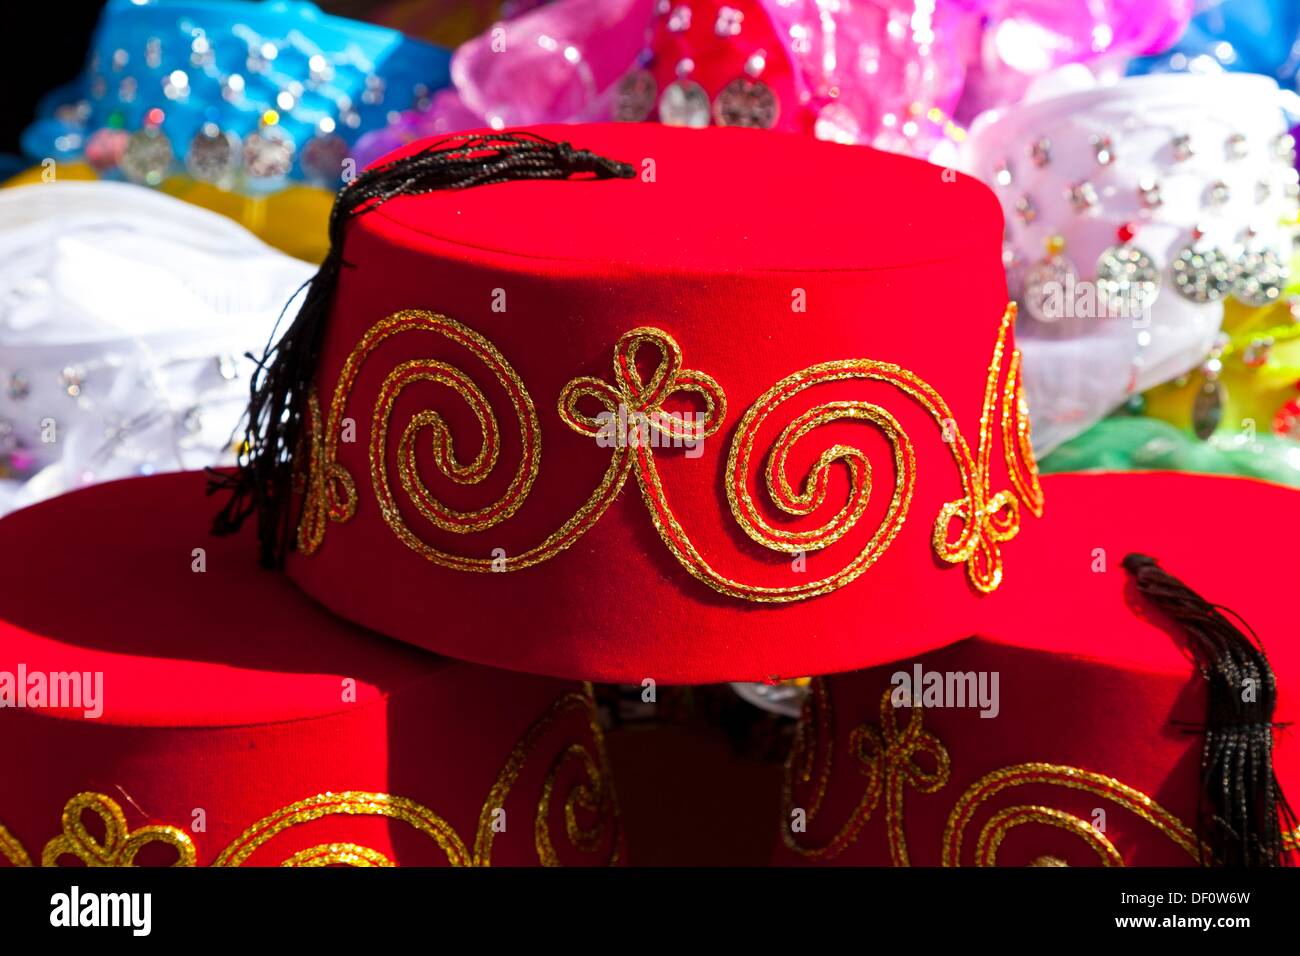 Turkish Hat High Resolution Stock Photography and Images - Alamy